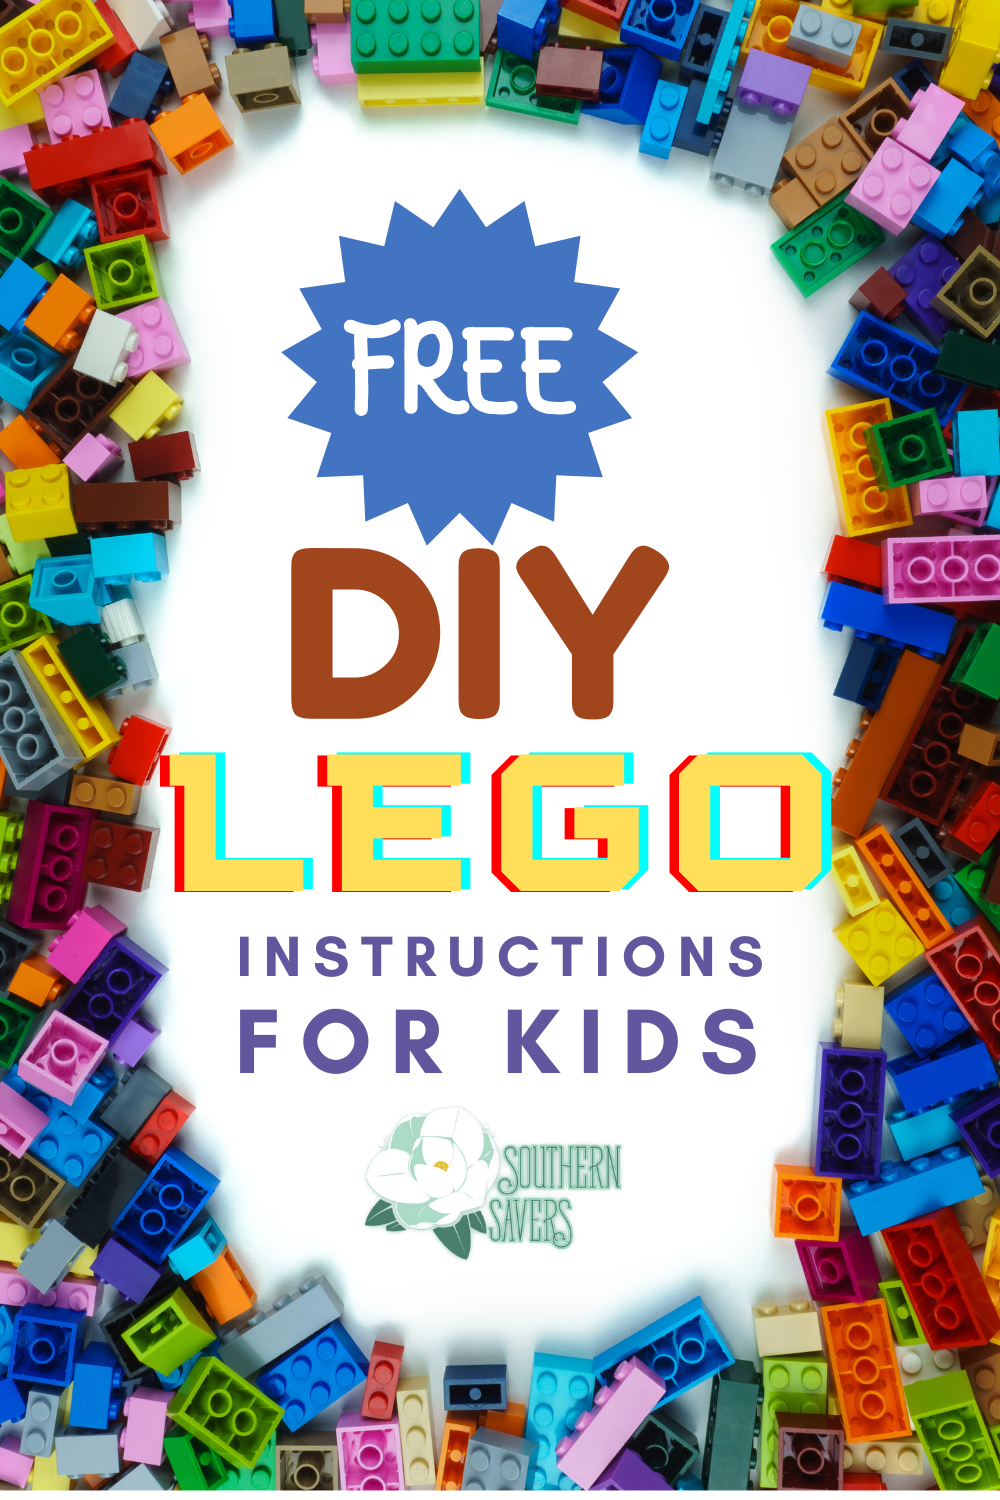 Have fun with your LEGOs without purchasing an expensive kit! These free DIY LEGO instructions for kids use basic bricks to make animals, vehicles and more!